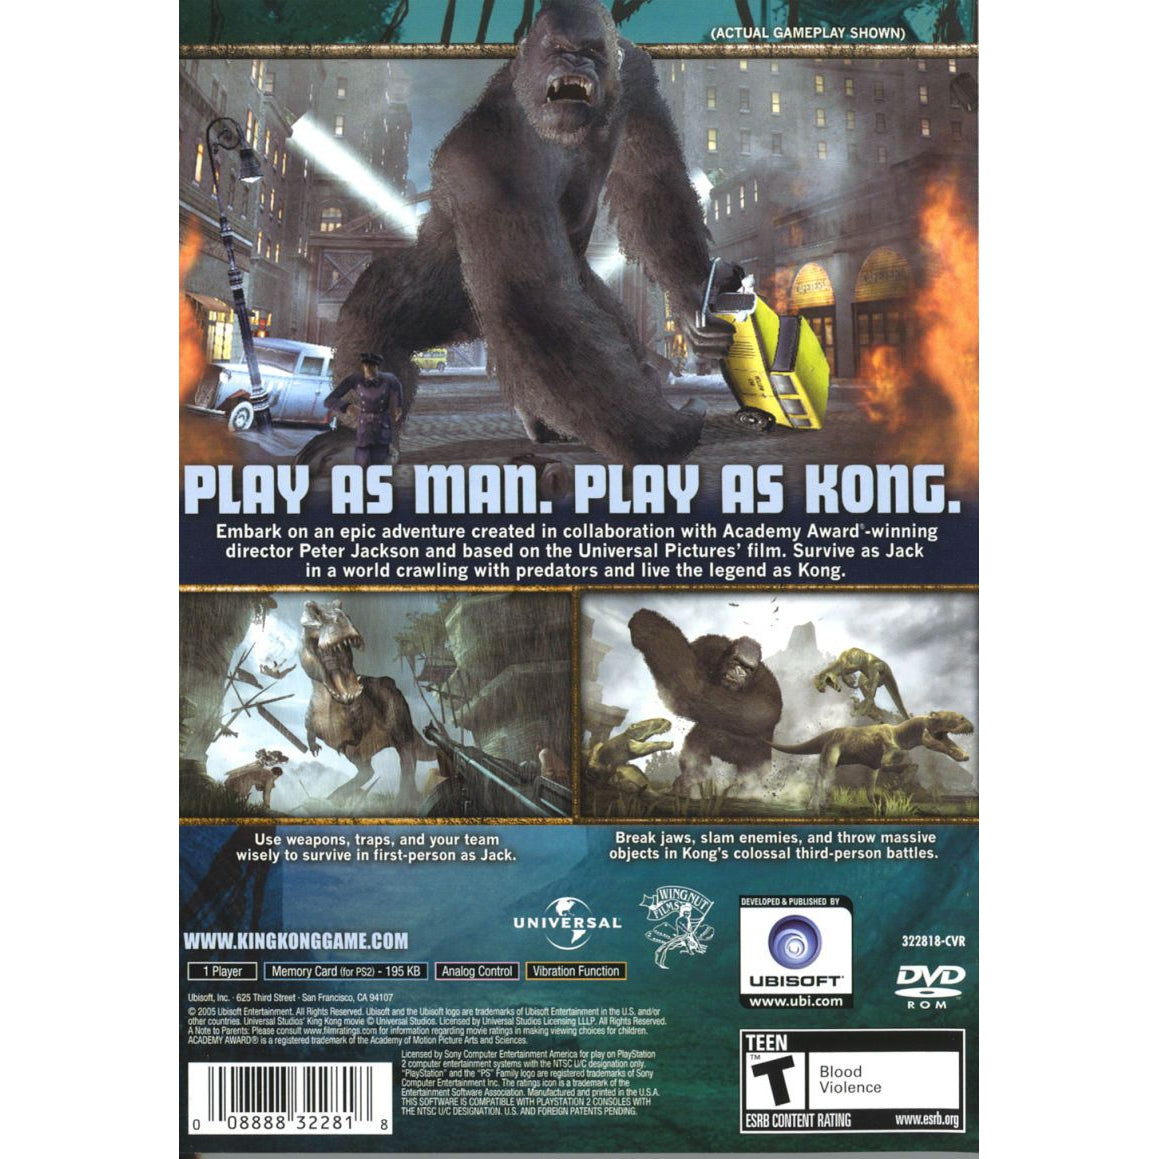 Peter Jackson's King Kong: The Official Game of the Movie - PlayStation 2 (PS2) Game Complete - YourGamingShop.com - Buy, Sell, Trade Video Games Online. 120 Day Warranty. Satisfaction Guaranteed.